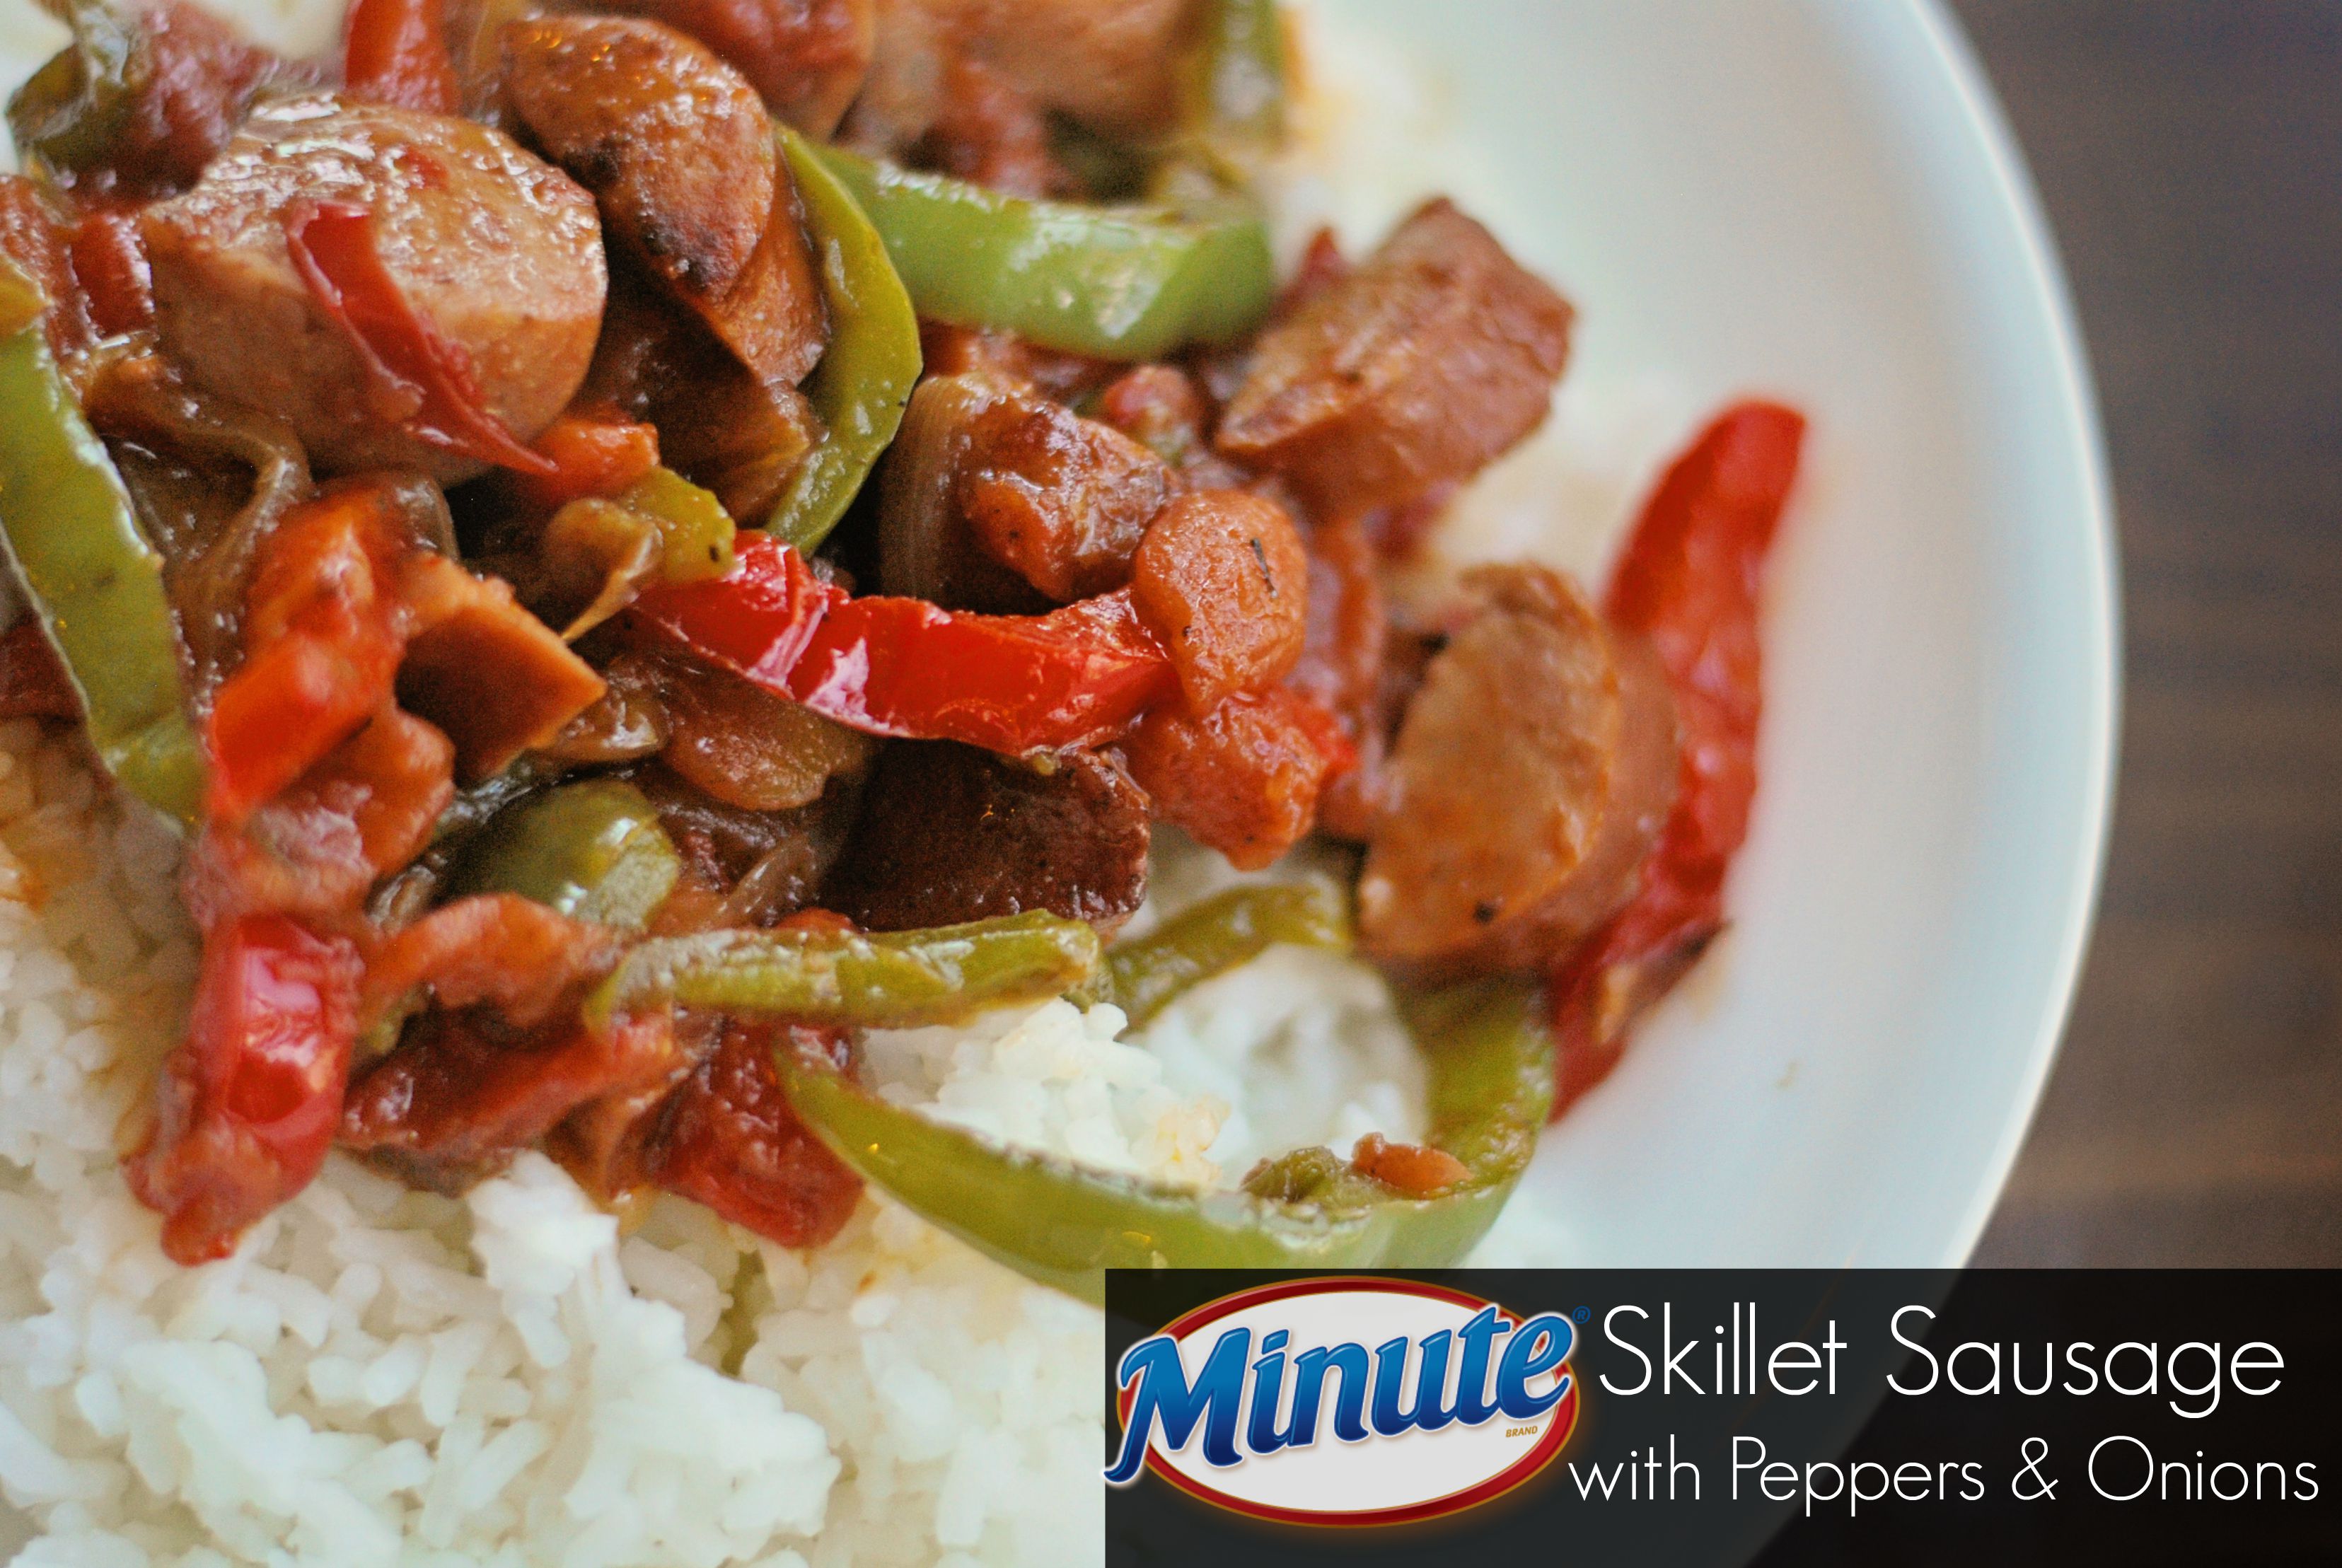 Skillet Sausage with Peppers & Onions